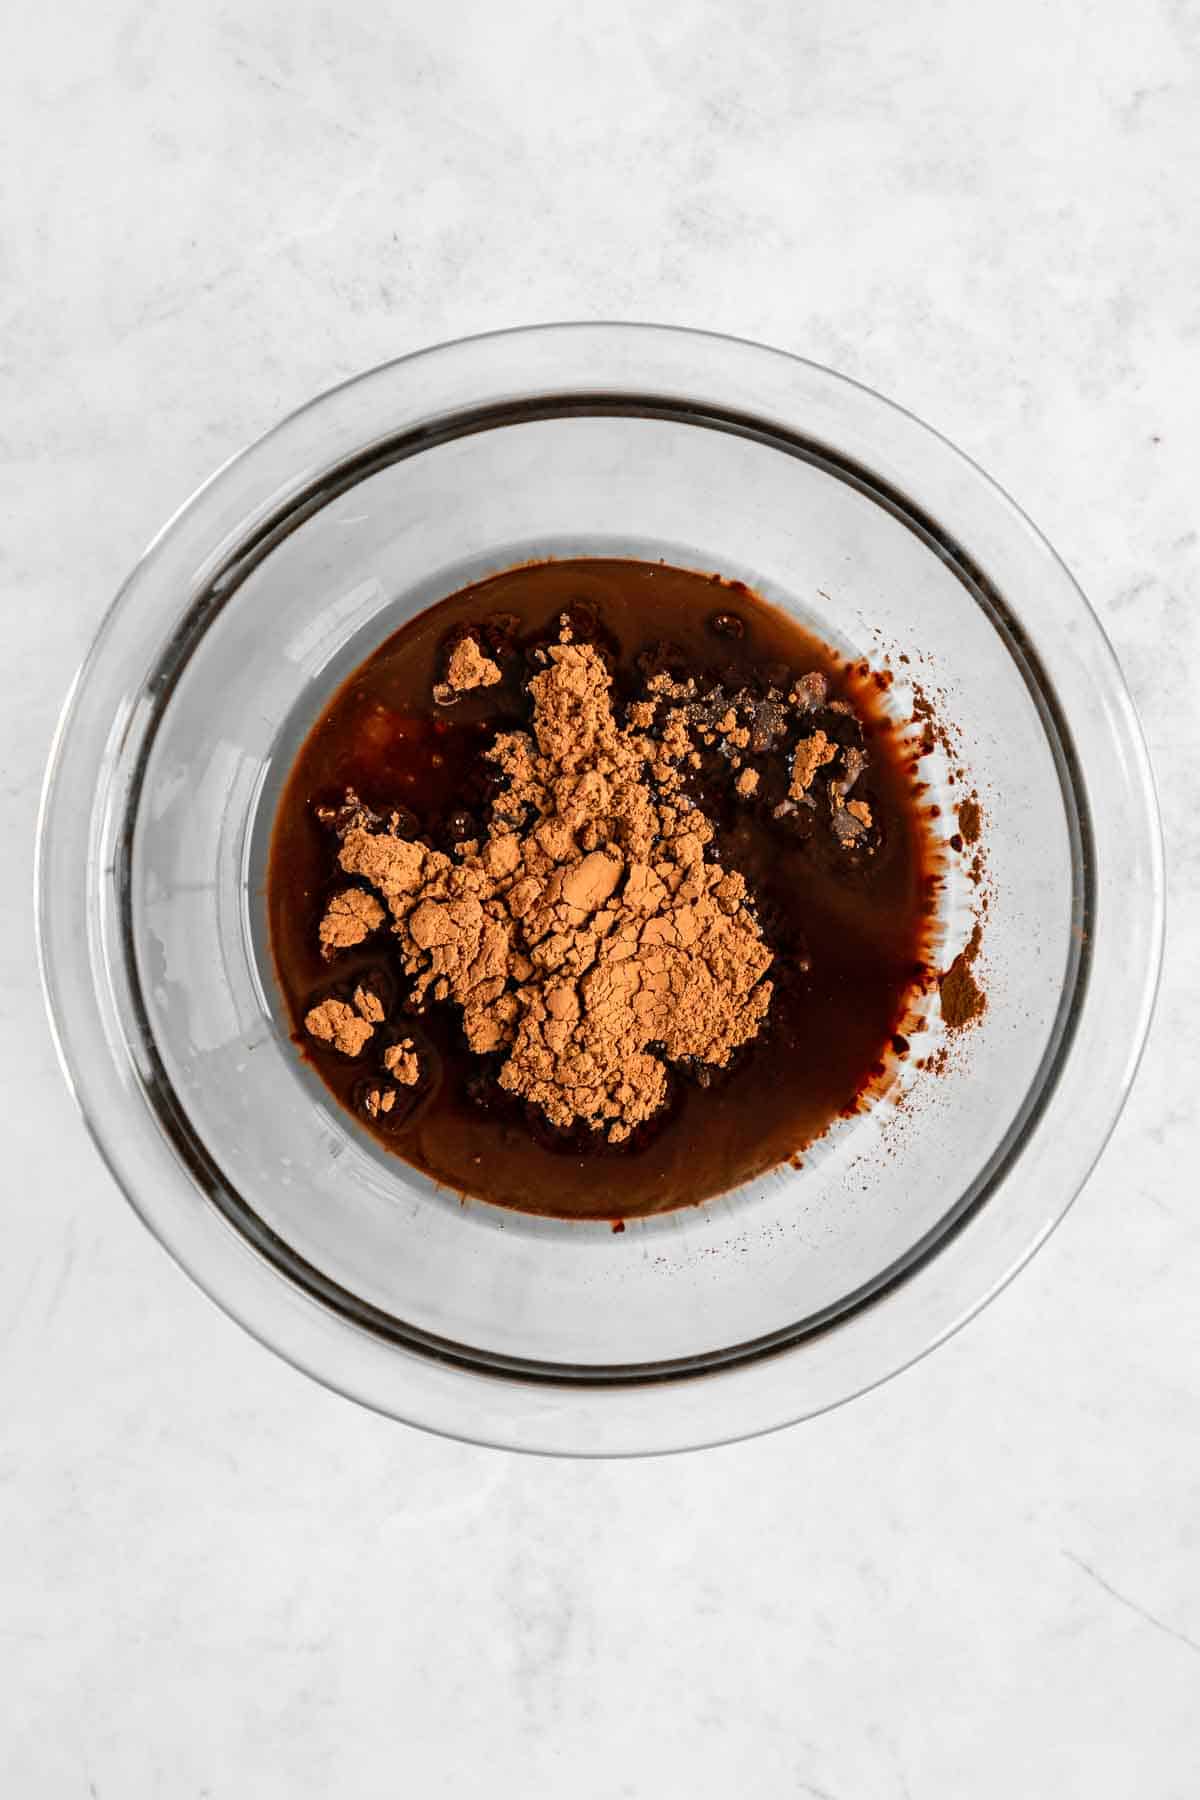 cacao powder, coconut oil, and maple syrup in a glass bowl